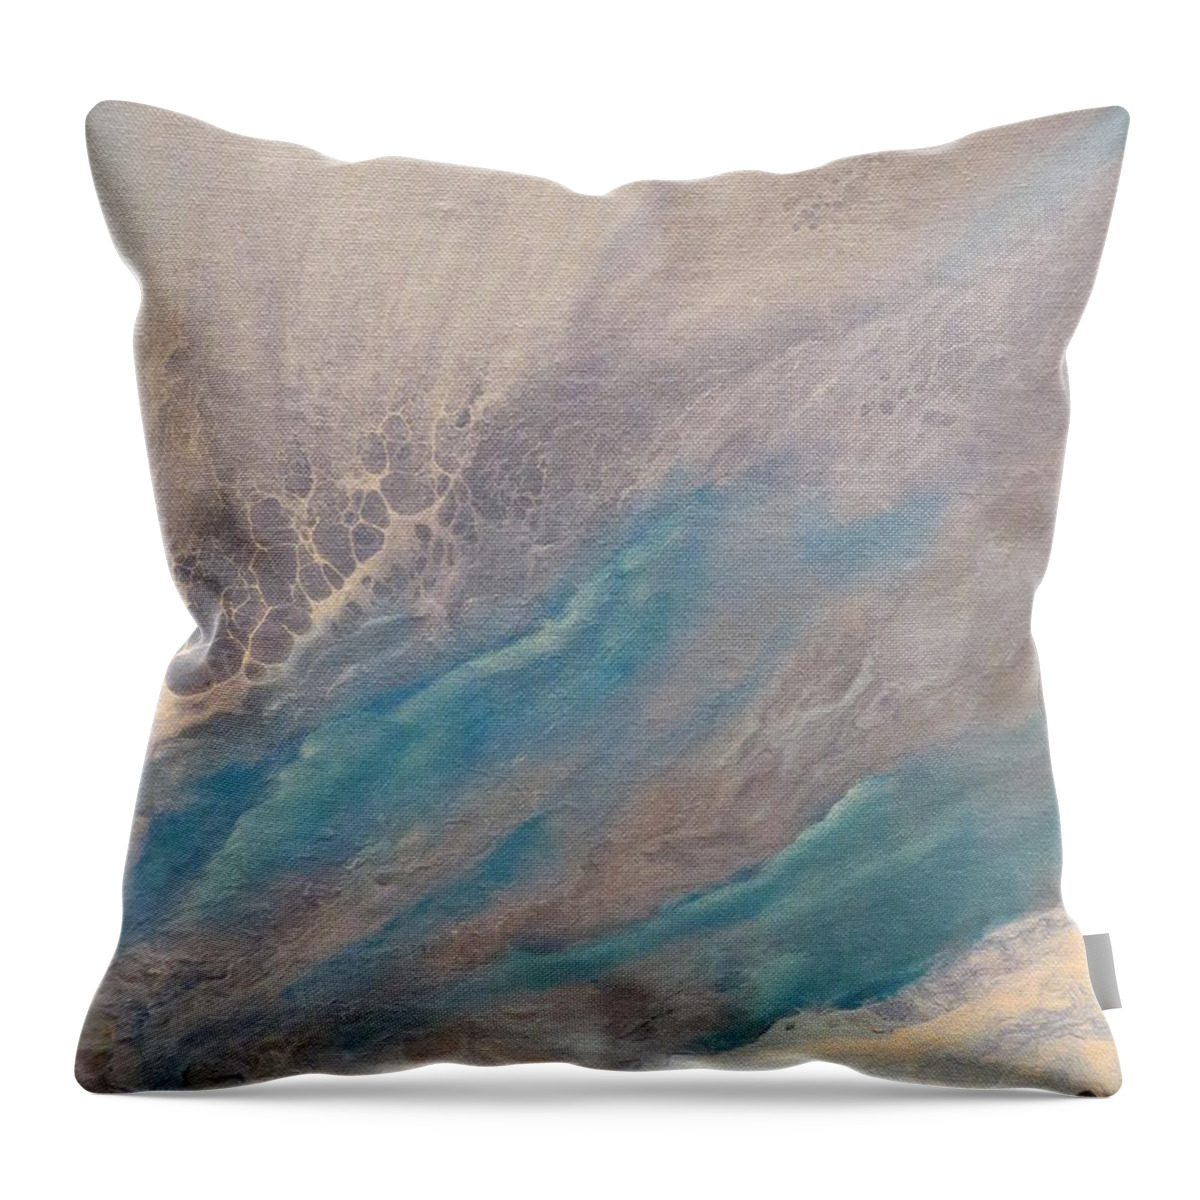 Abstract Throw Pillow featuring the painting The Light by Soraya Silvestri